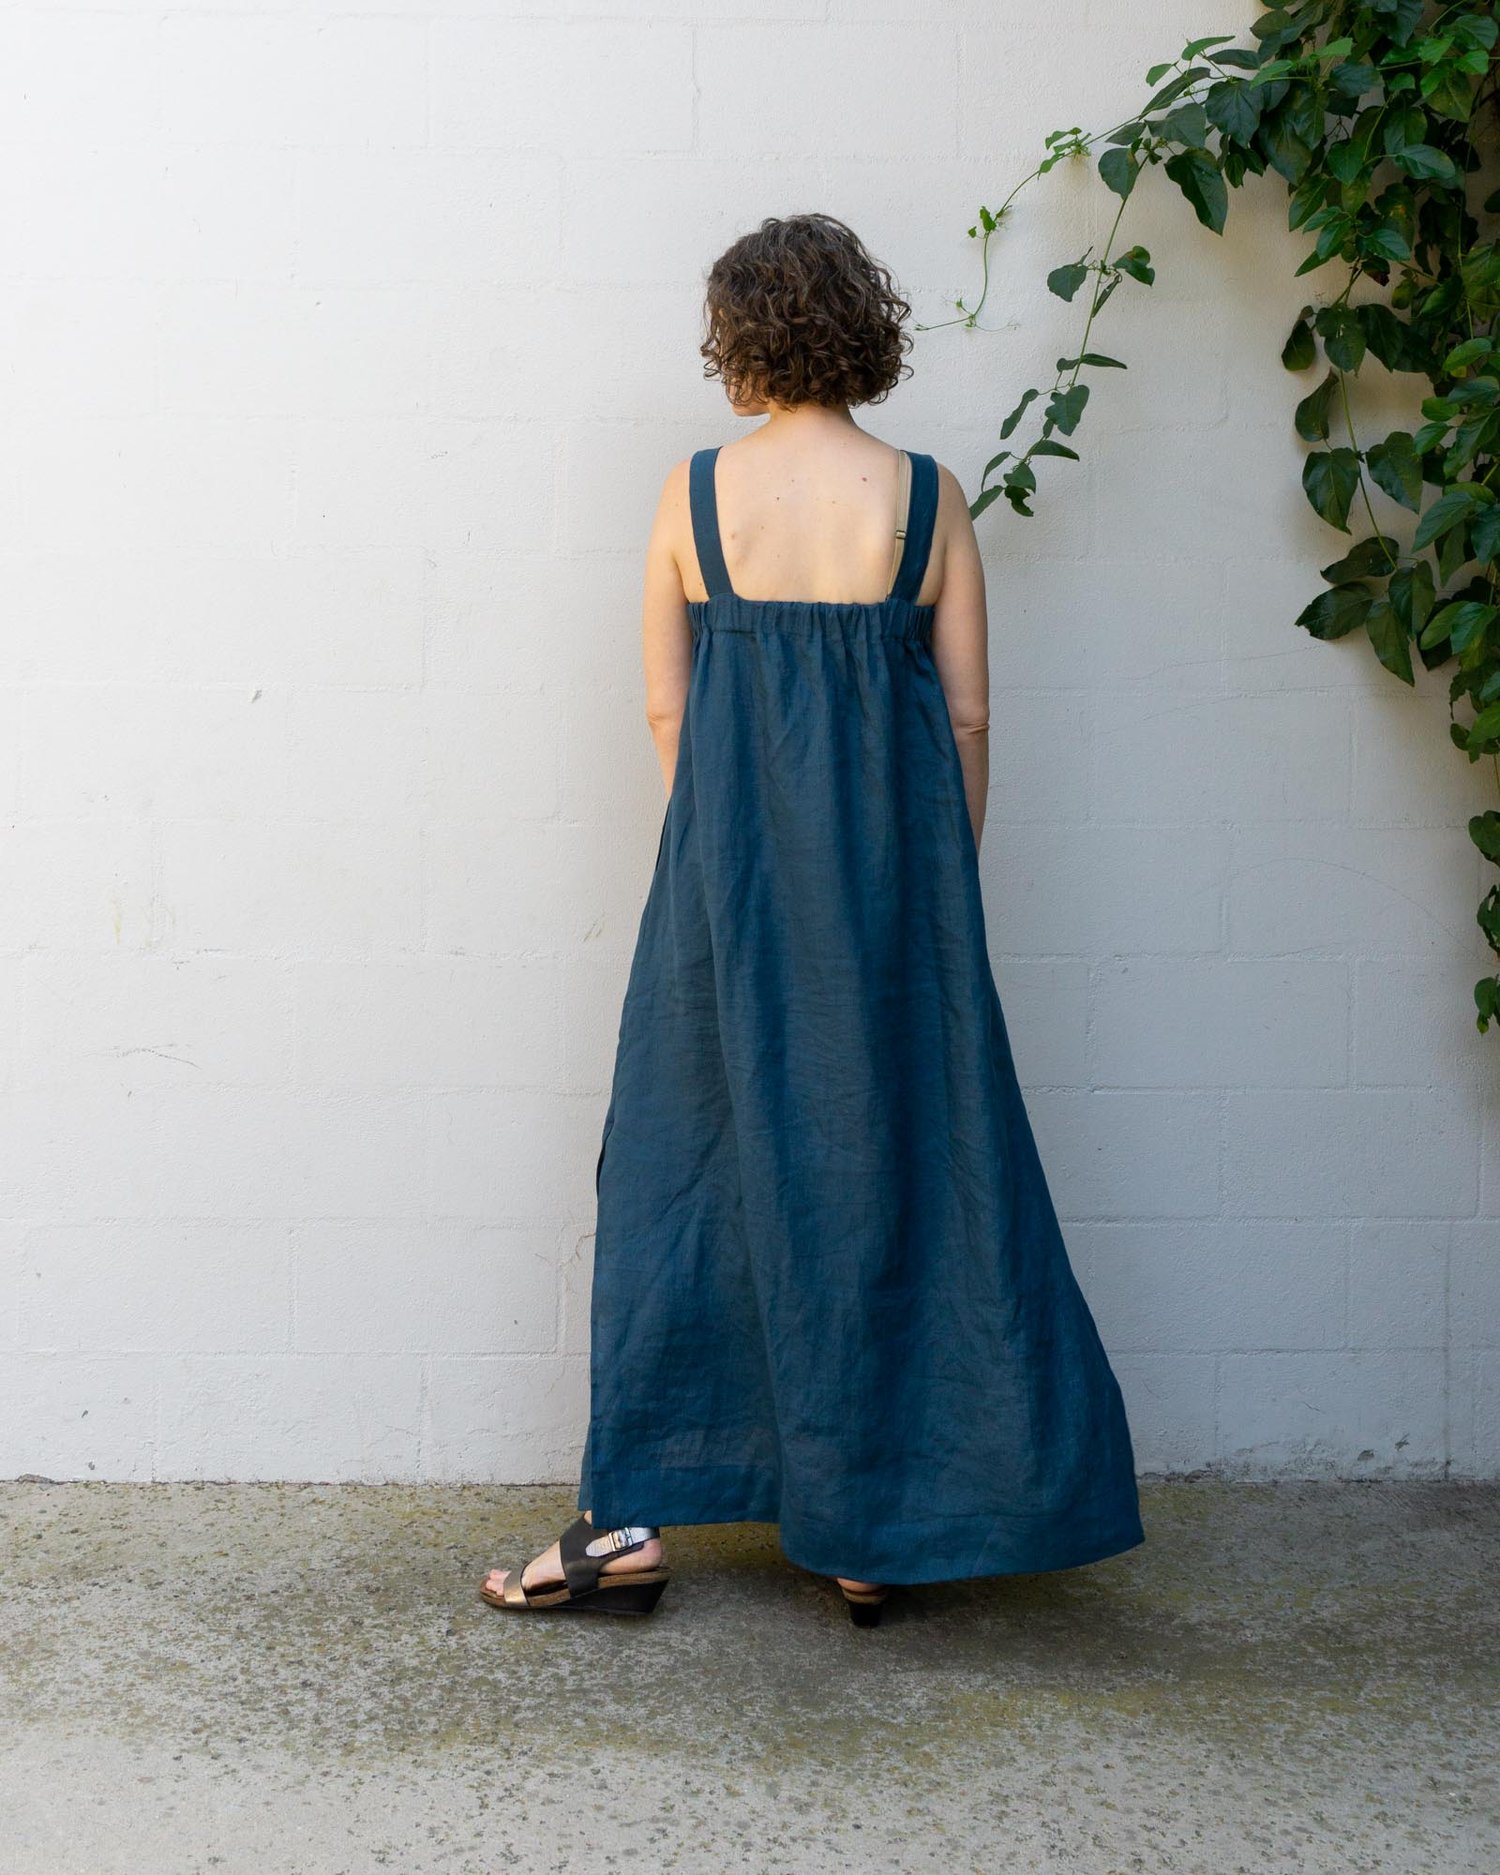 DIY Linen Maxi Dress—Review of the Wide-Strap Maxi Dress by Peppermint ...